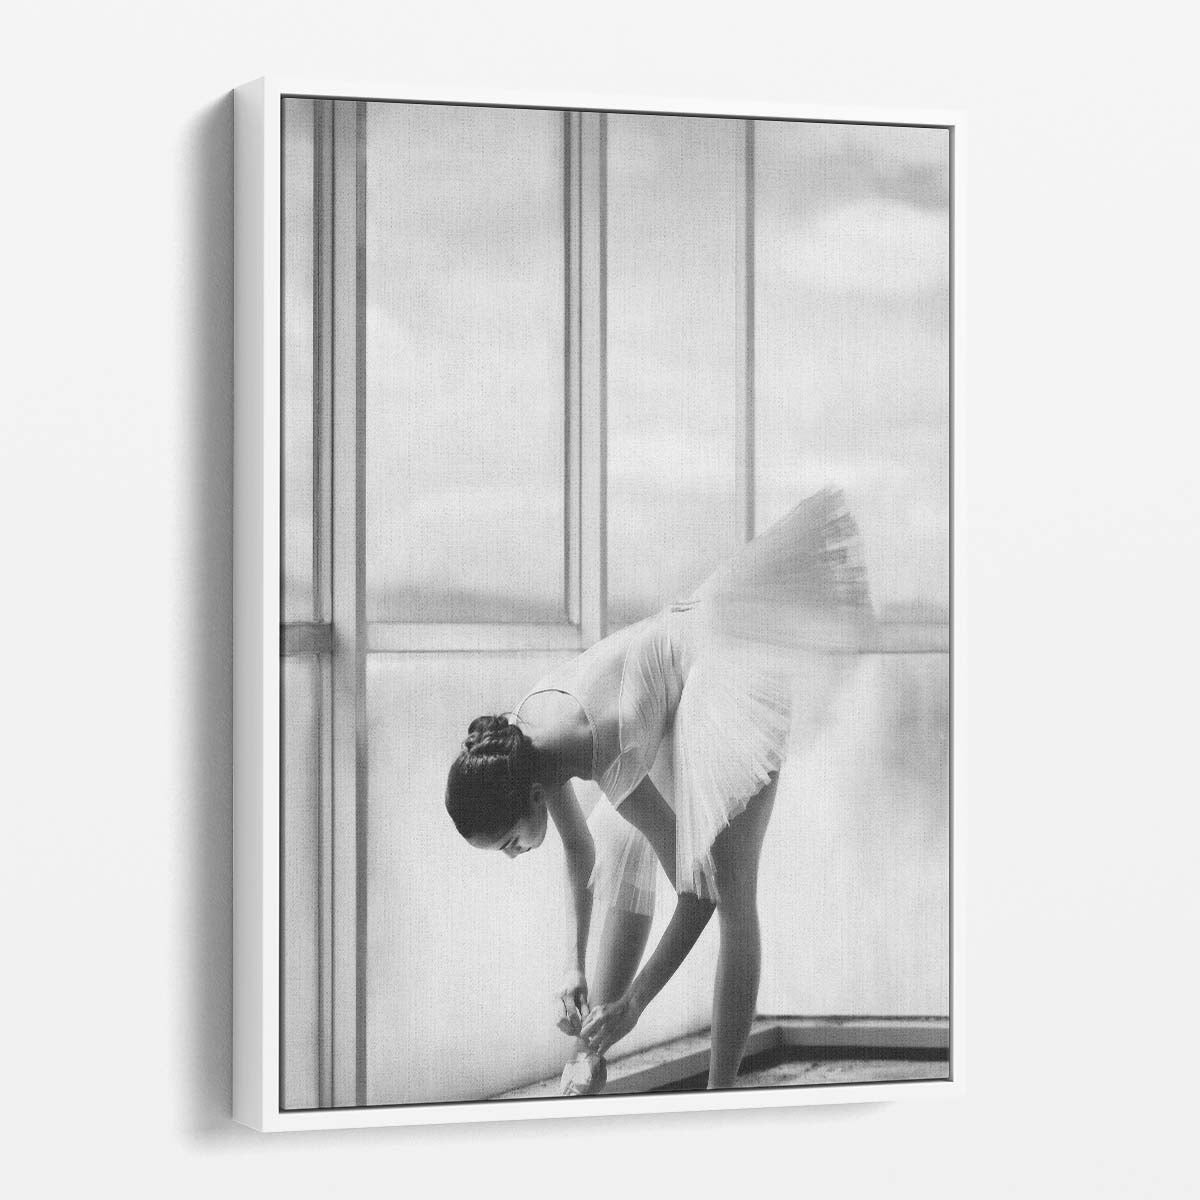 Graceful Ballerina Preparation Dance, Black and White Photography Art by Luxuriance Designs, made in USA